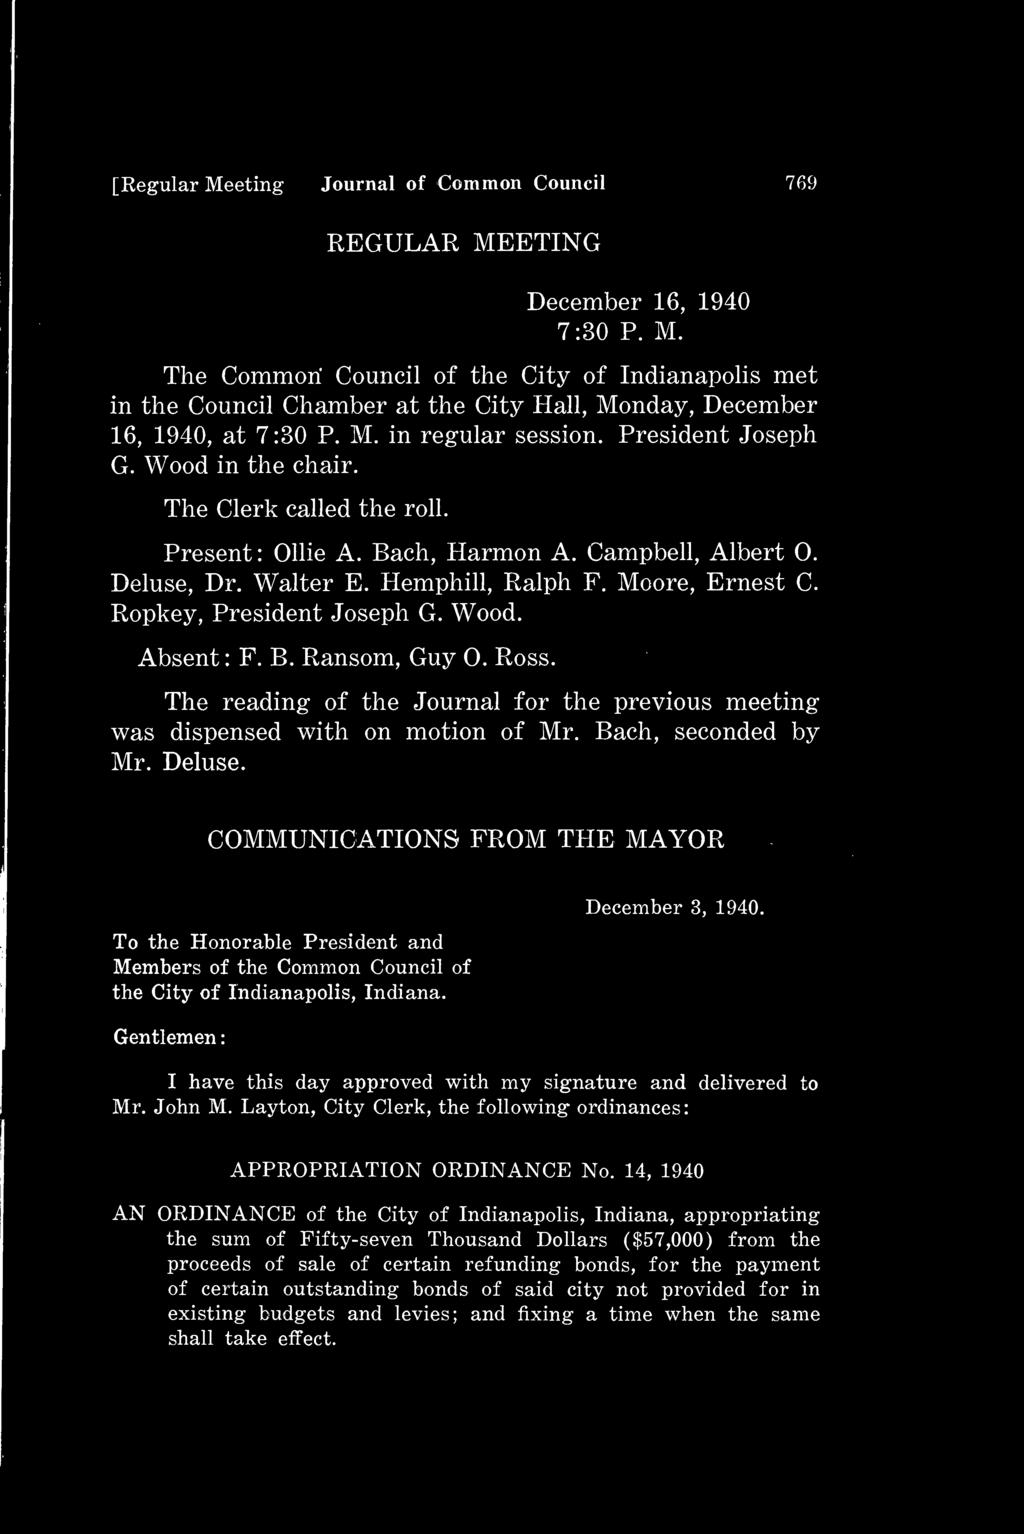 [Regular Meeting Journal of Common Council 709 REGULAR MEETING December 16, 1940 7:30 P. M. The Common Council of the City of Indianapolis met in the Council Chamber at the City Hall, Monday, December 16, 1940, at 7:30 P.